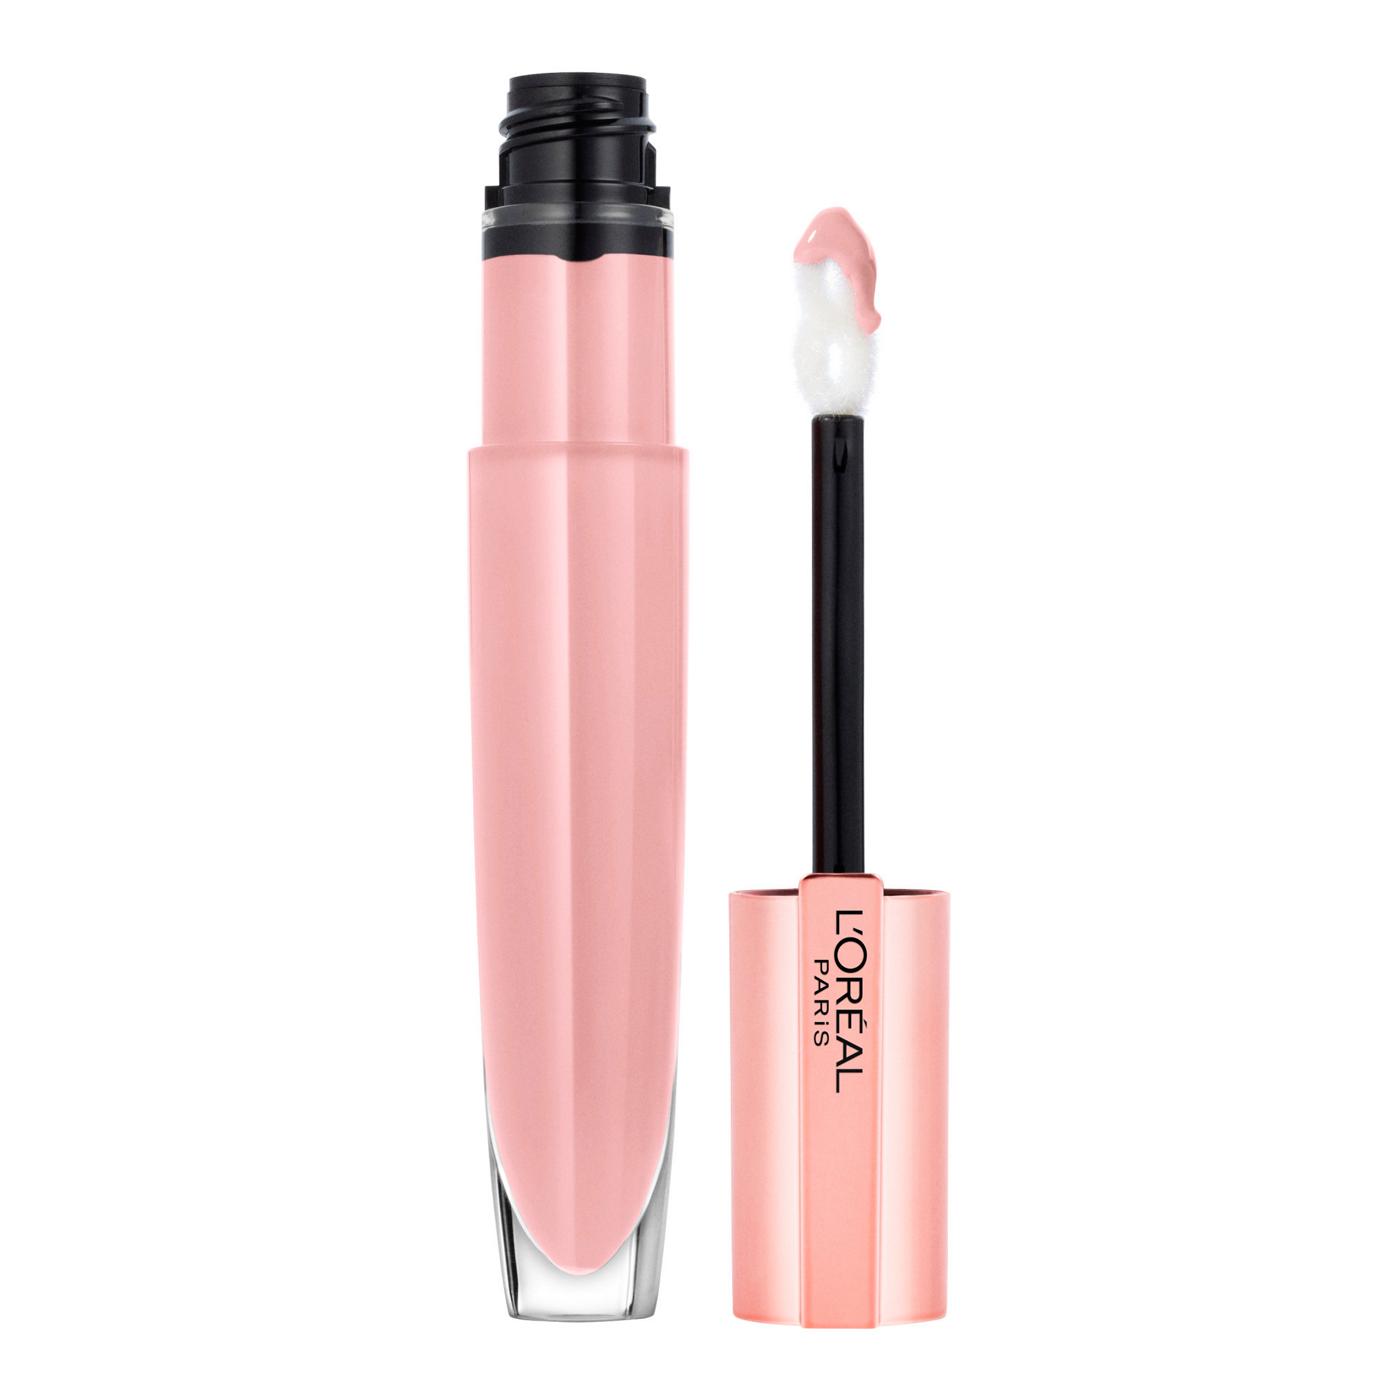 L'Oréal Paris Glow Paradise  Lip Balm-in-Gloss Pomegranate Extract Pristine Pink; image 1 of 5